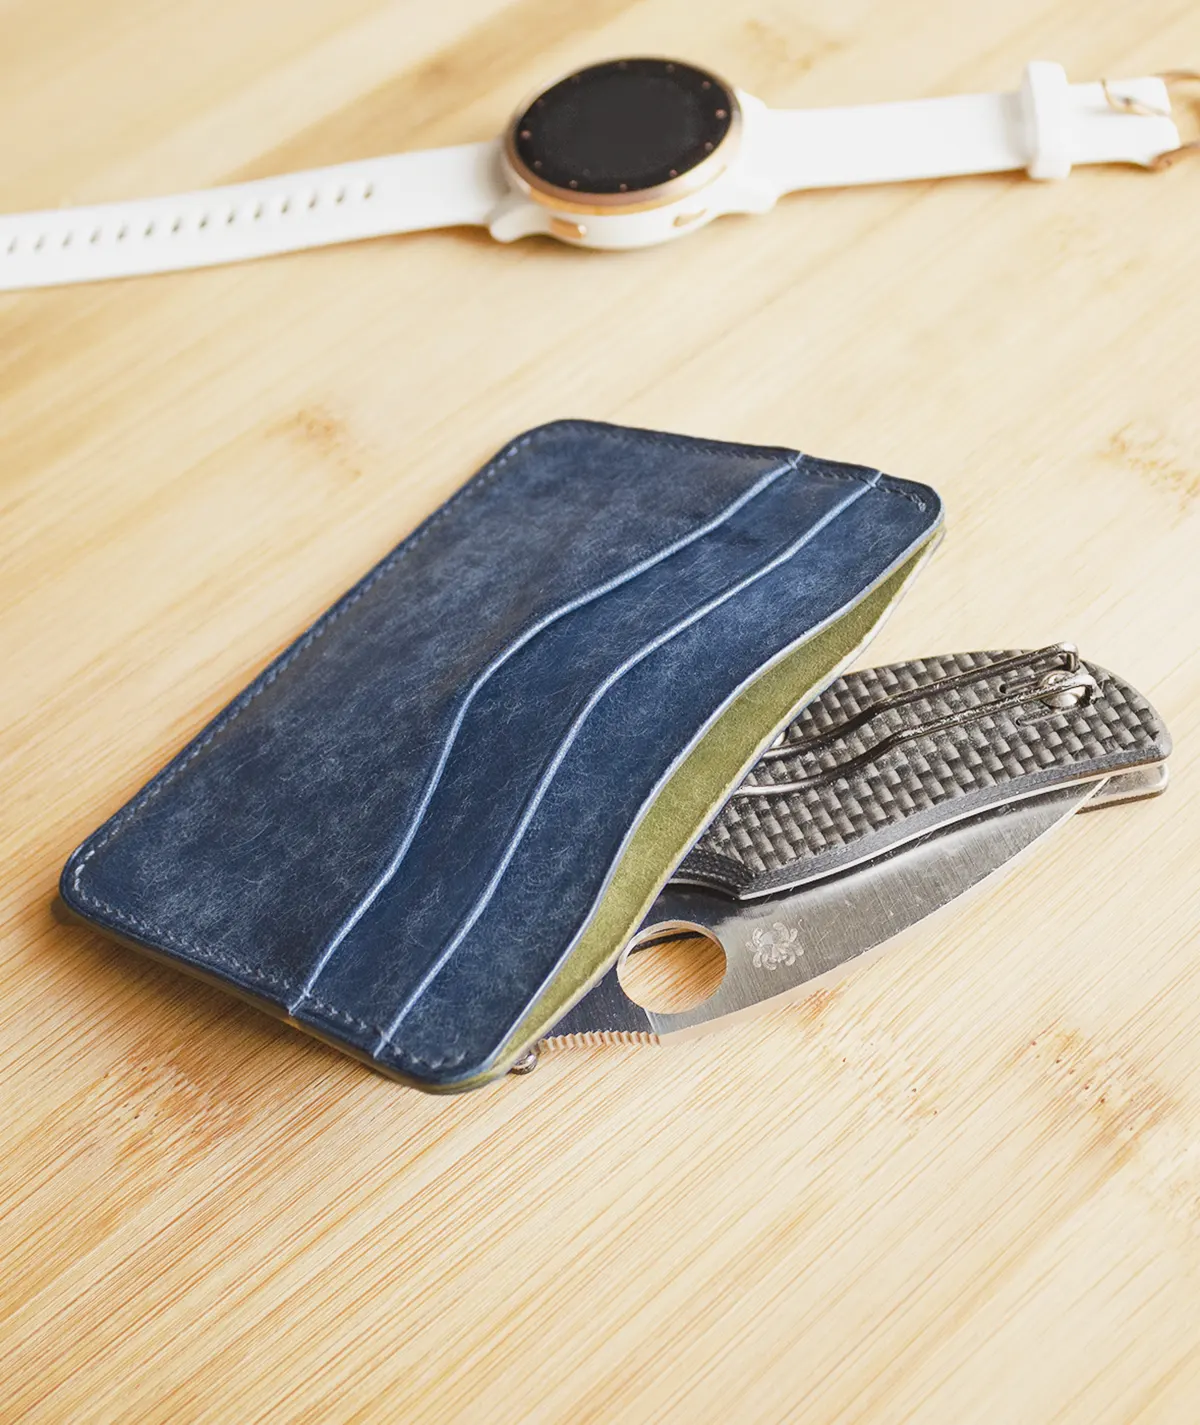 possala designs blue and green card holder